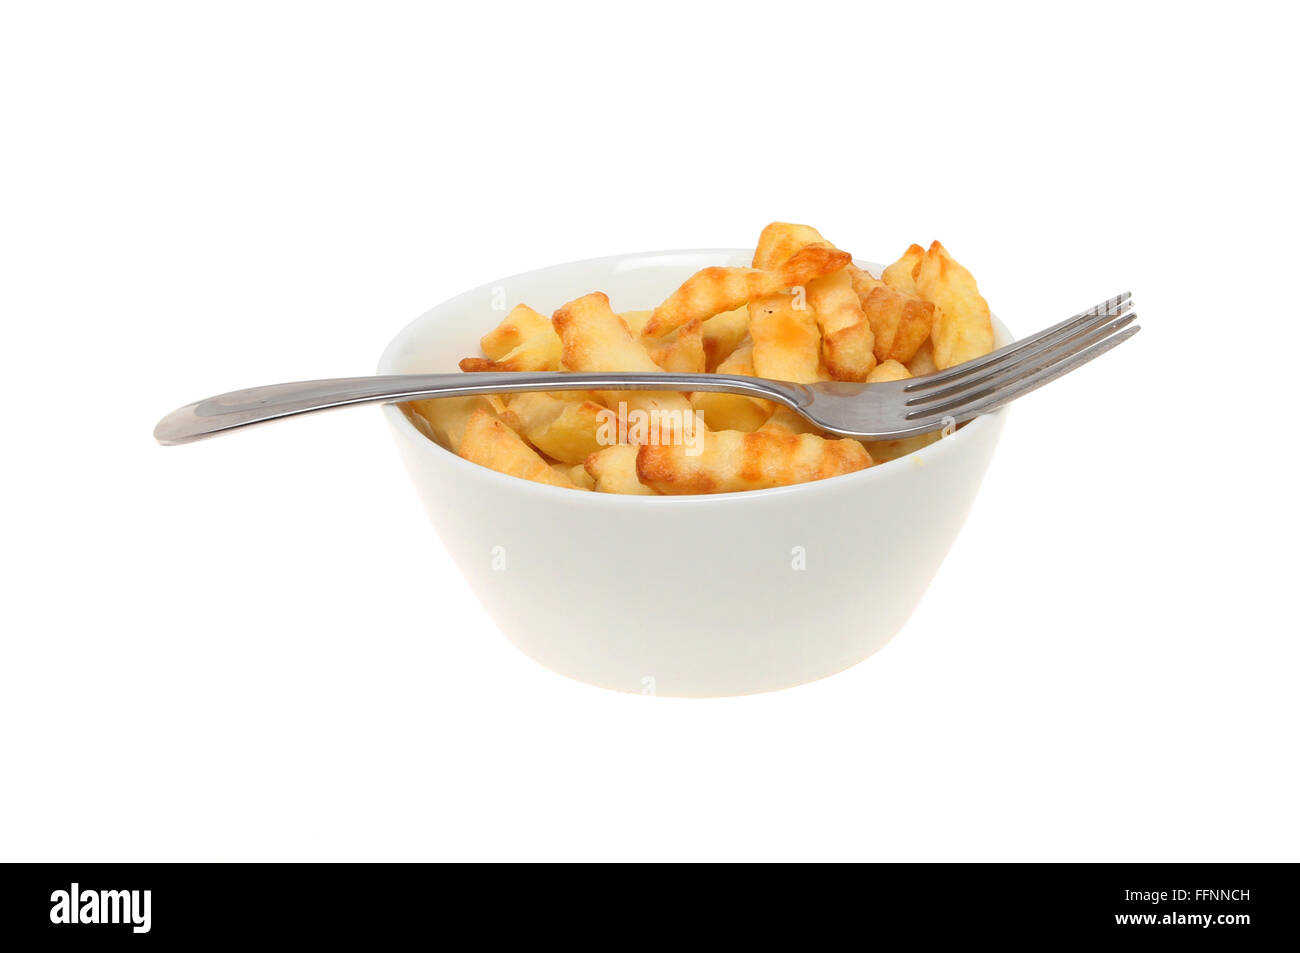 Bowl of crinkle cut chips with a fork isolated against white Stock Photo